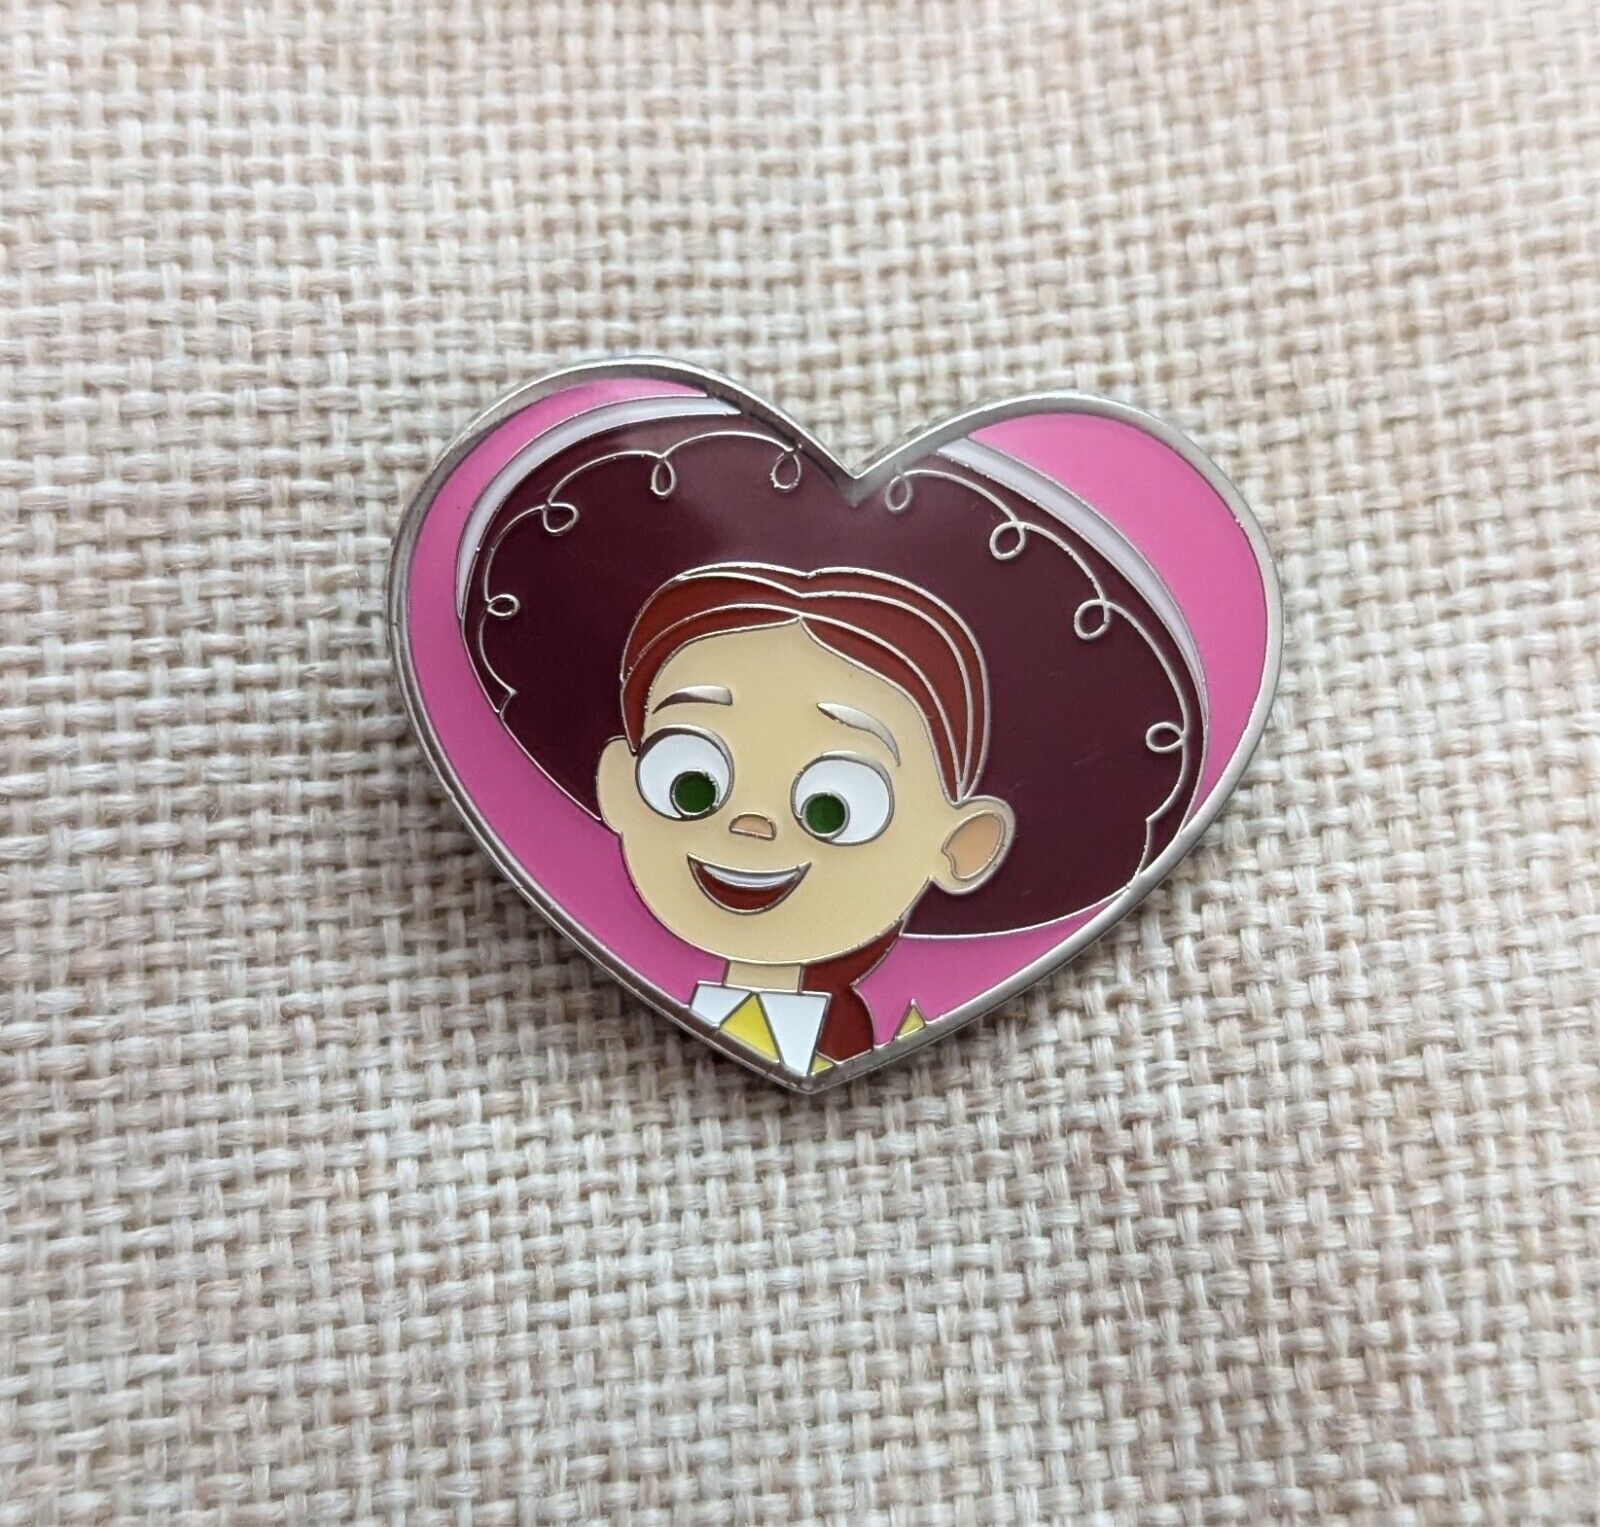 Disney pixar Pin Loungefly Toy Story Heart Series - Jessie cowgirl